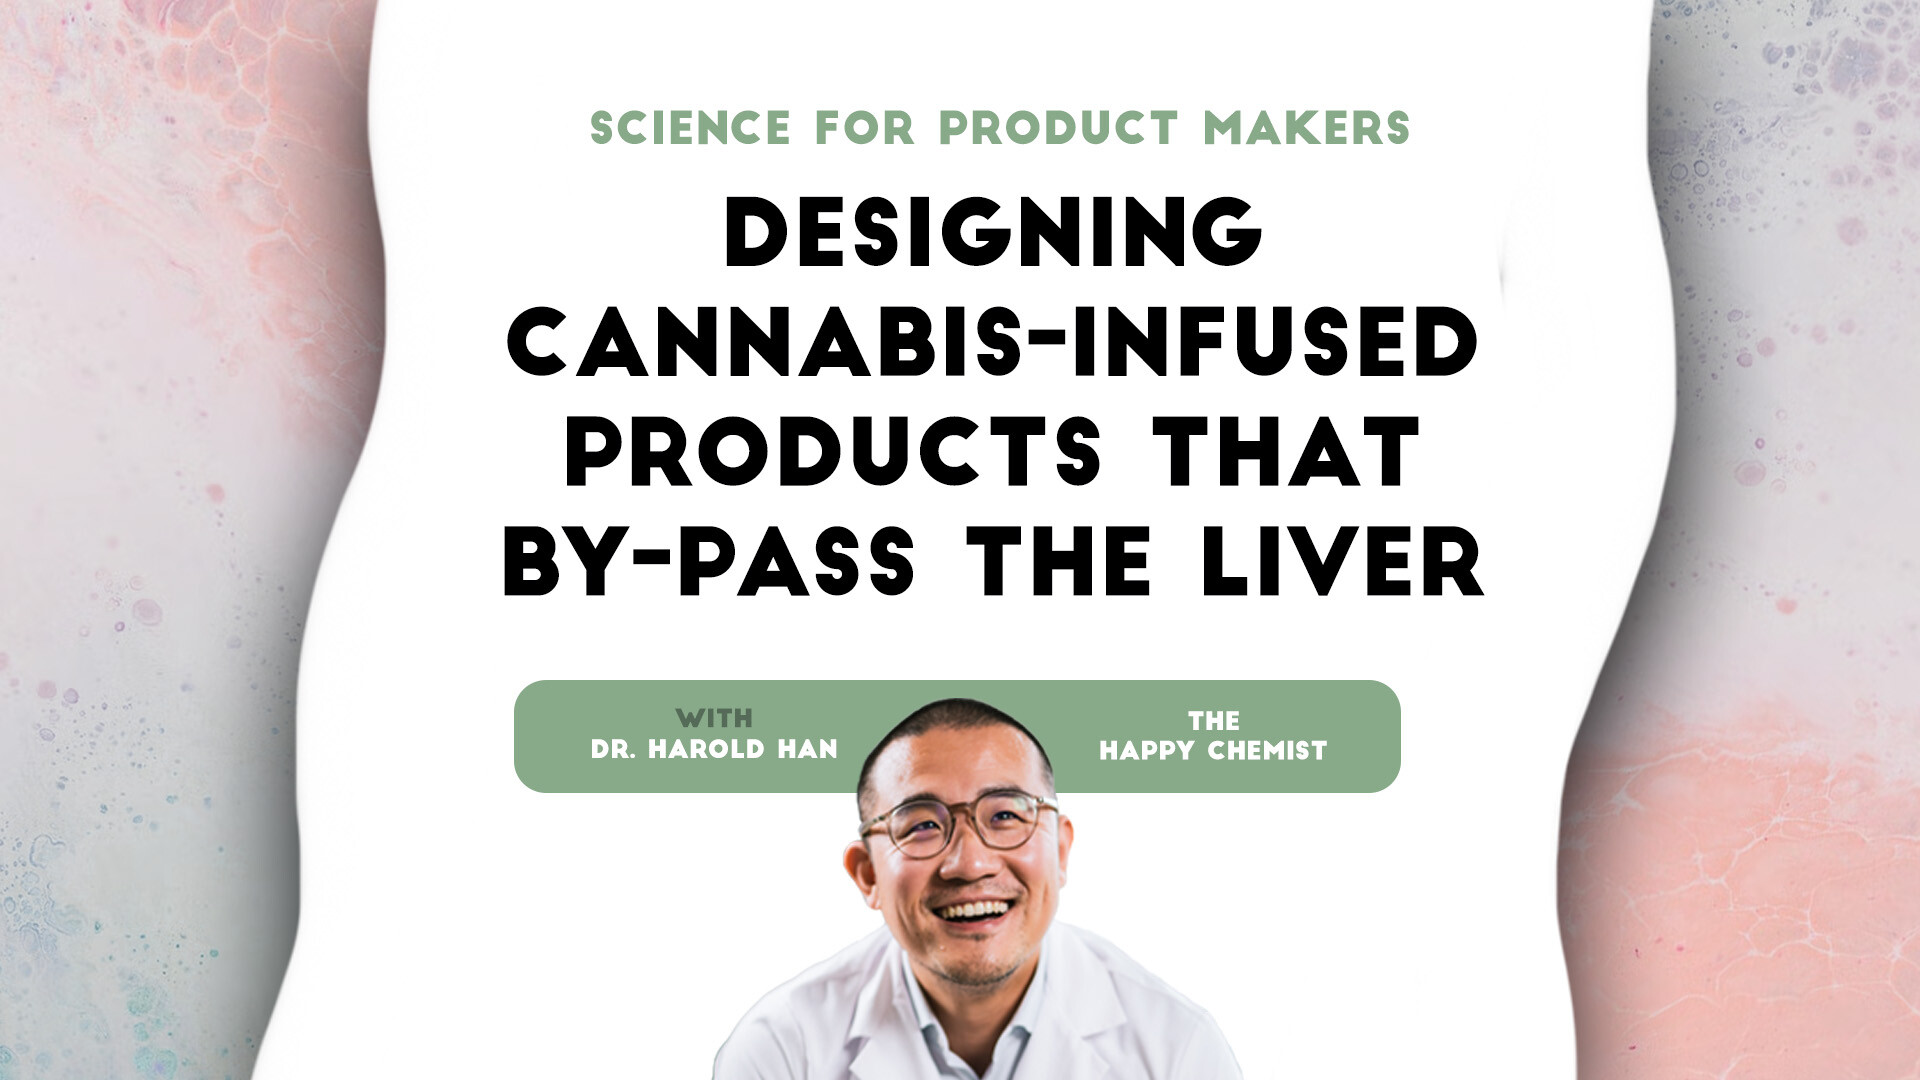 Science for product makers: designing cannabis-infused products that by-pass the liver